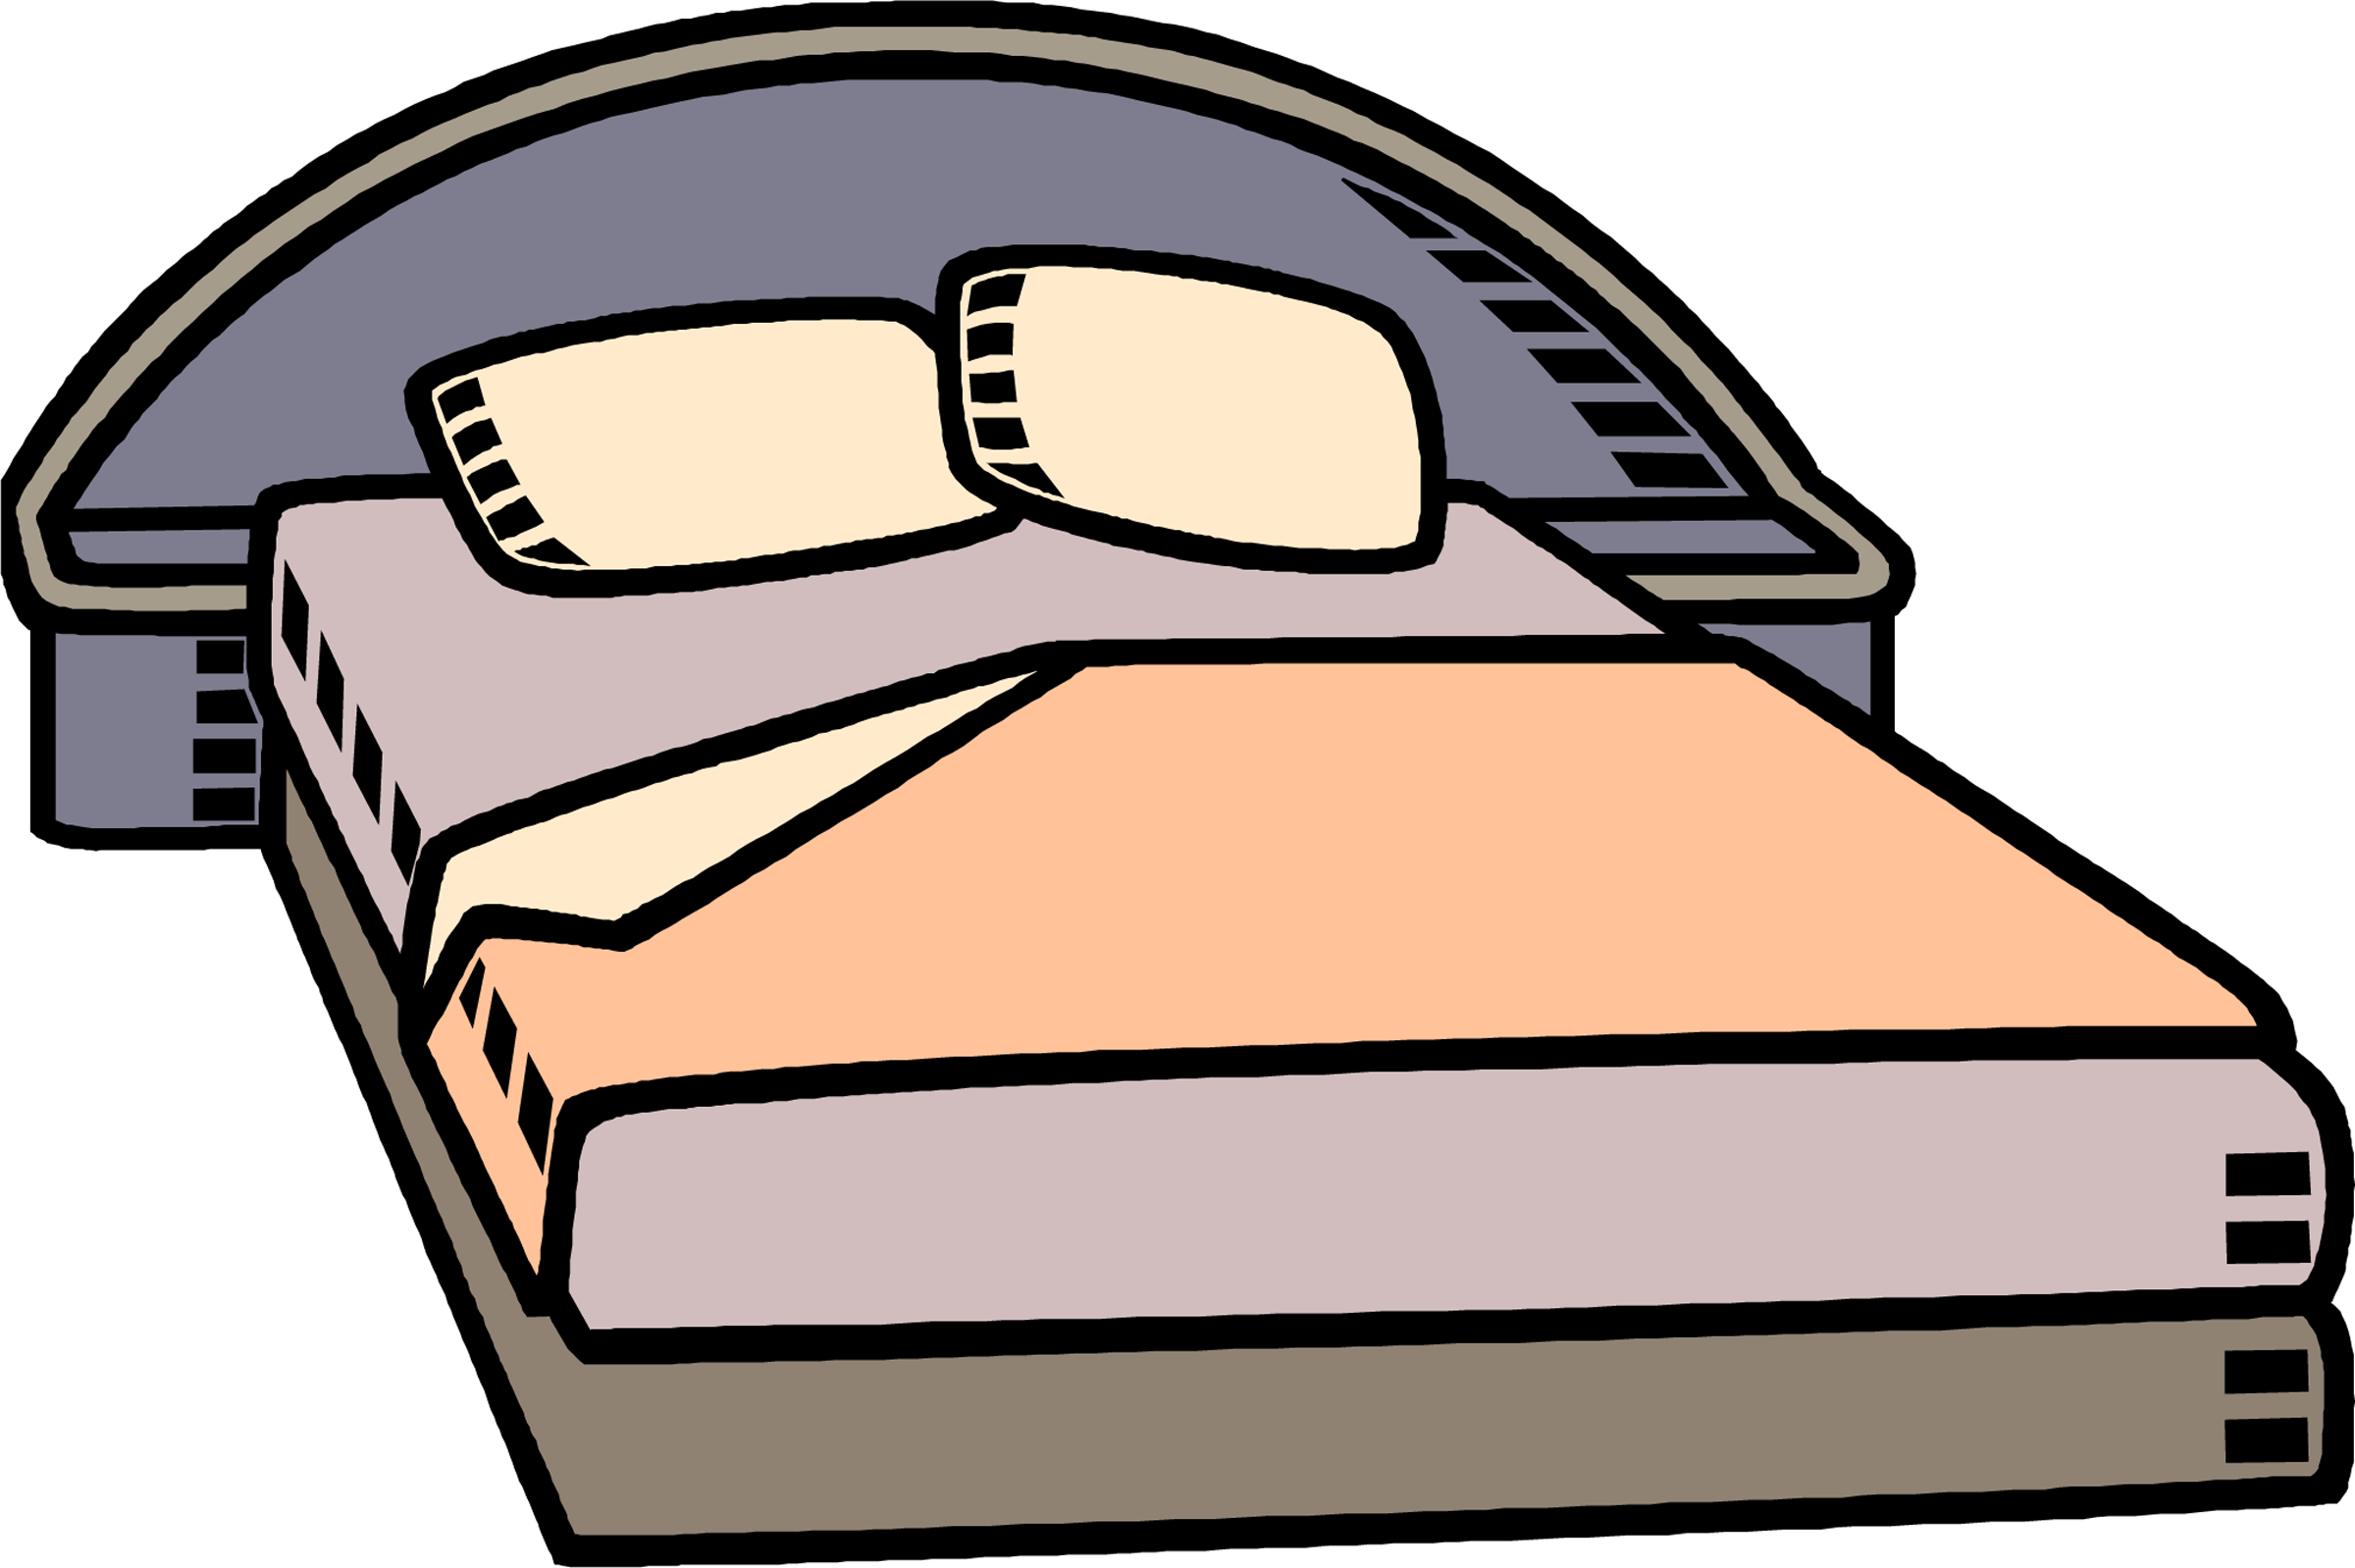 14 Make Bed Animated Picture Free Cliparts That You Can Download To